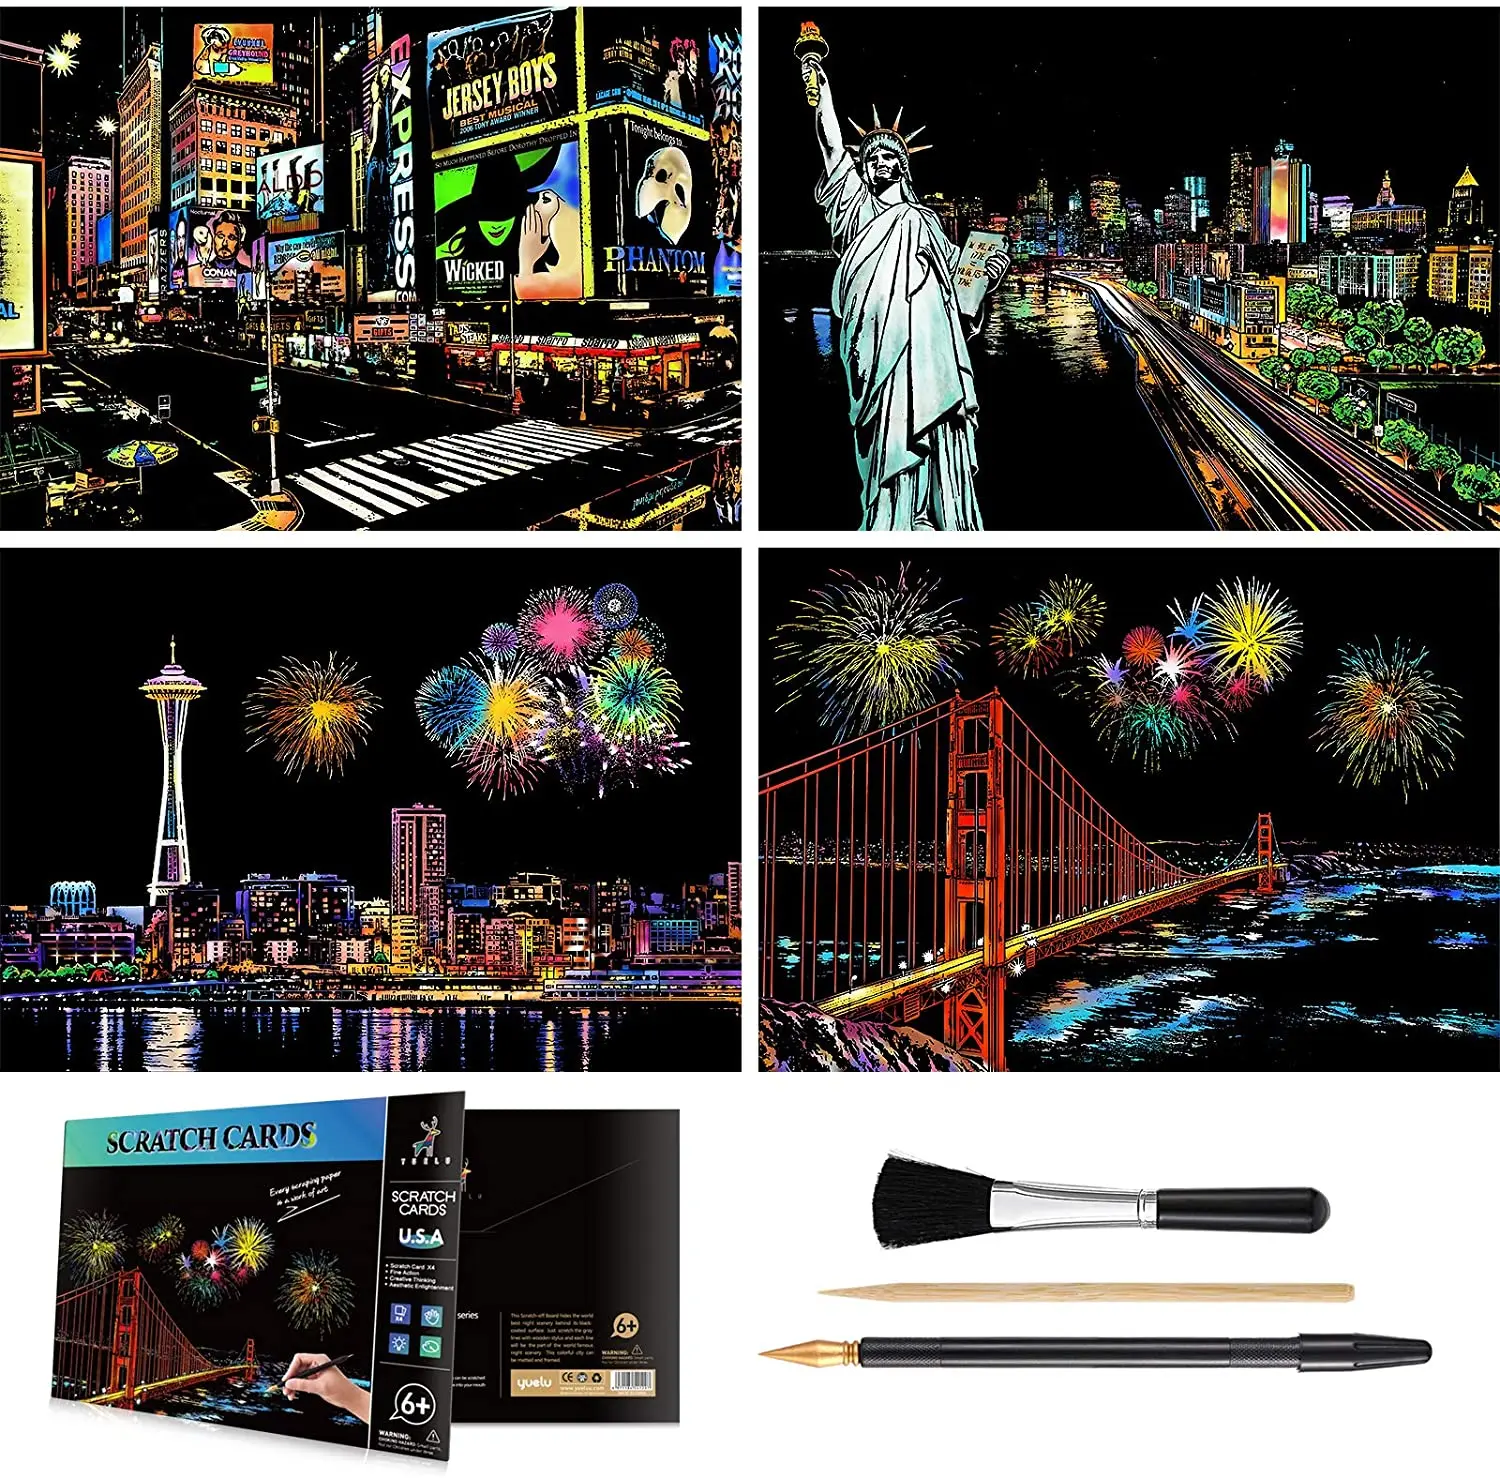 Creative Gift Castle - Amusement Park - Las Vegas Engraving & Craft Set Sketch Night View DIY Scratchboard for Kids & Adults Scratch Art Rainbow Painting Paper 16 x 11.2 with 7 Tools 